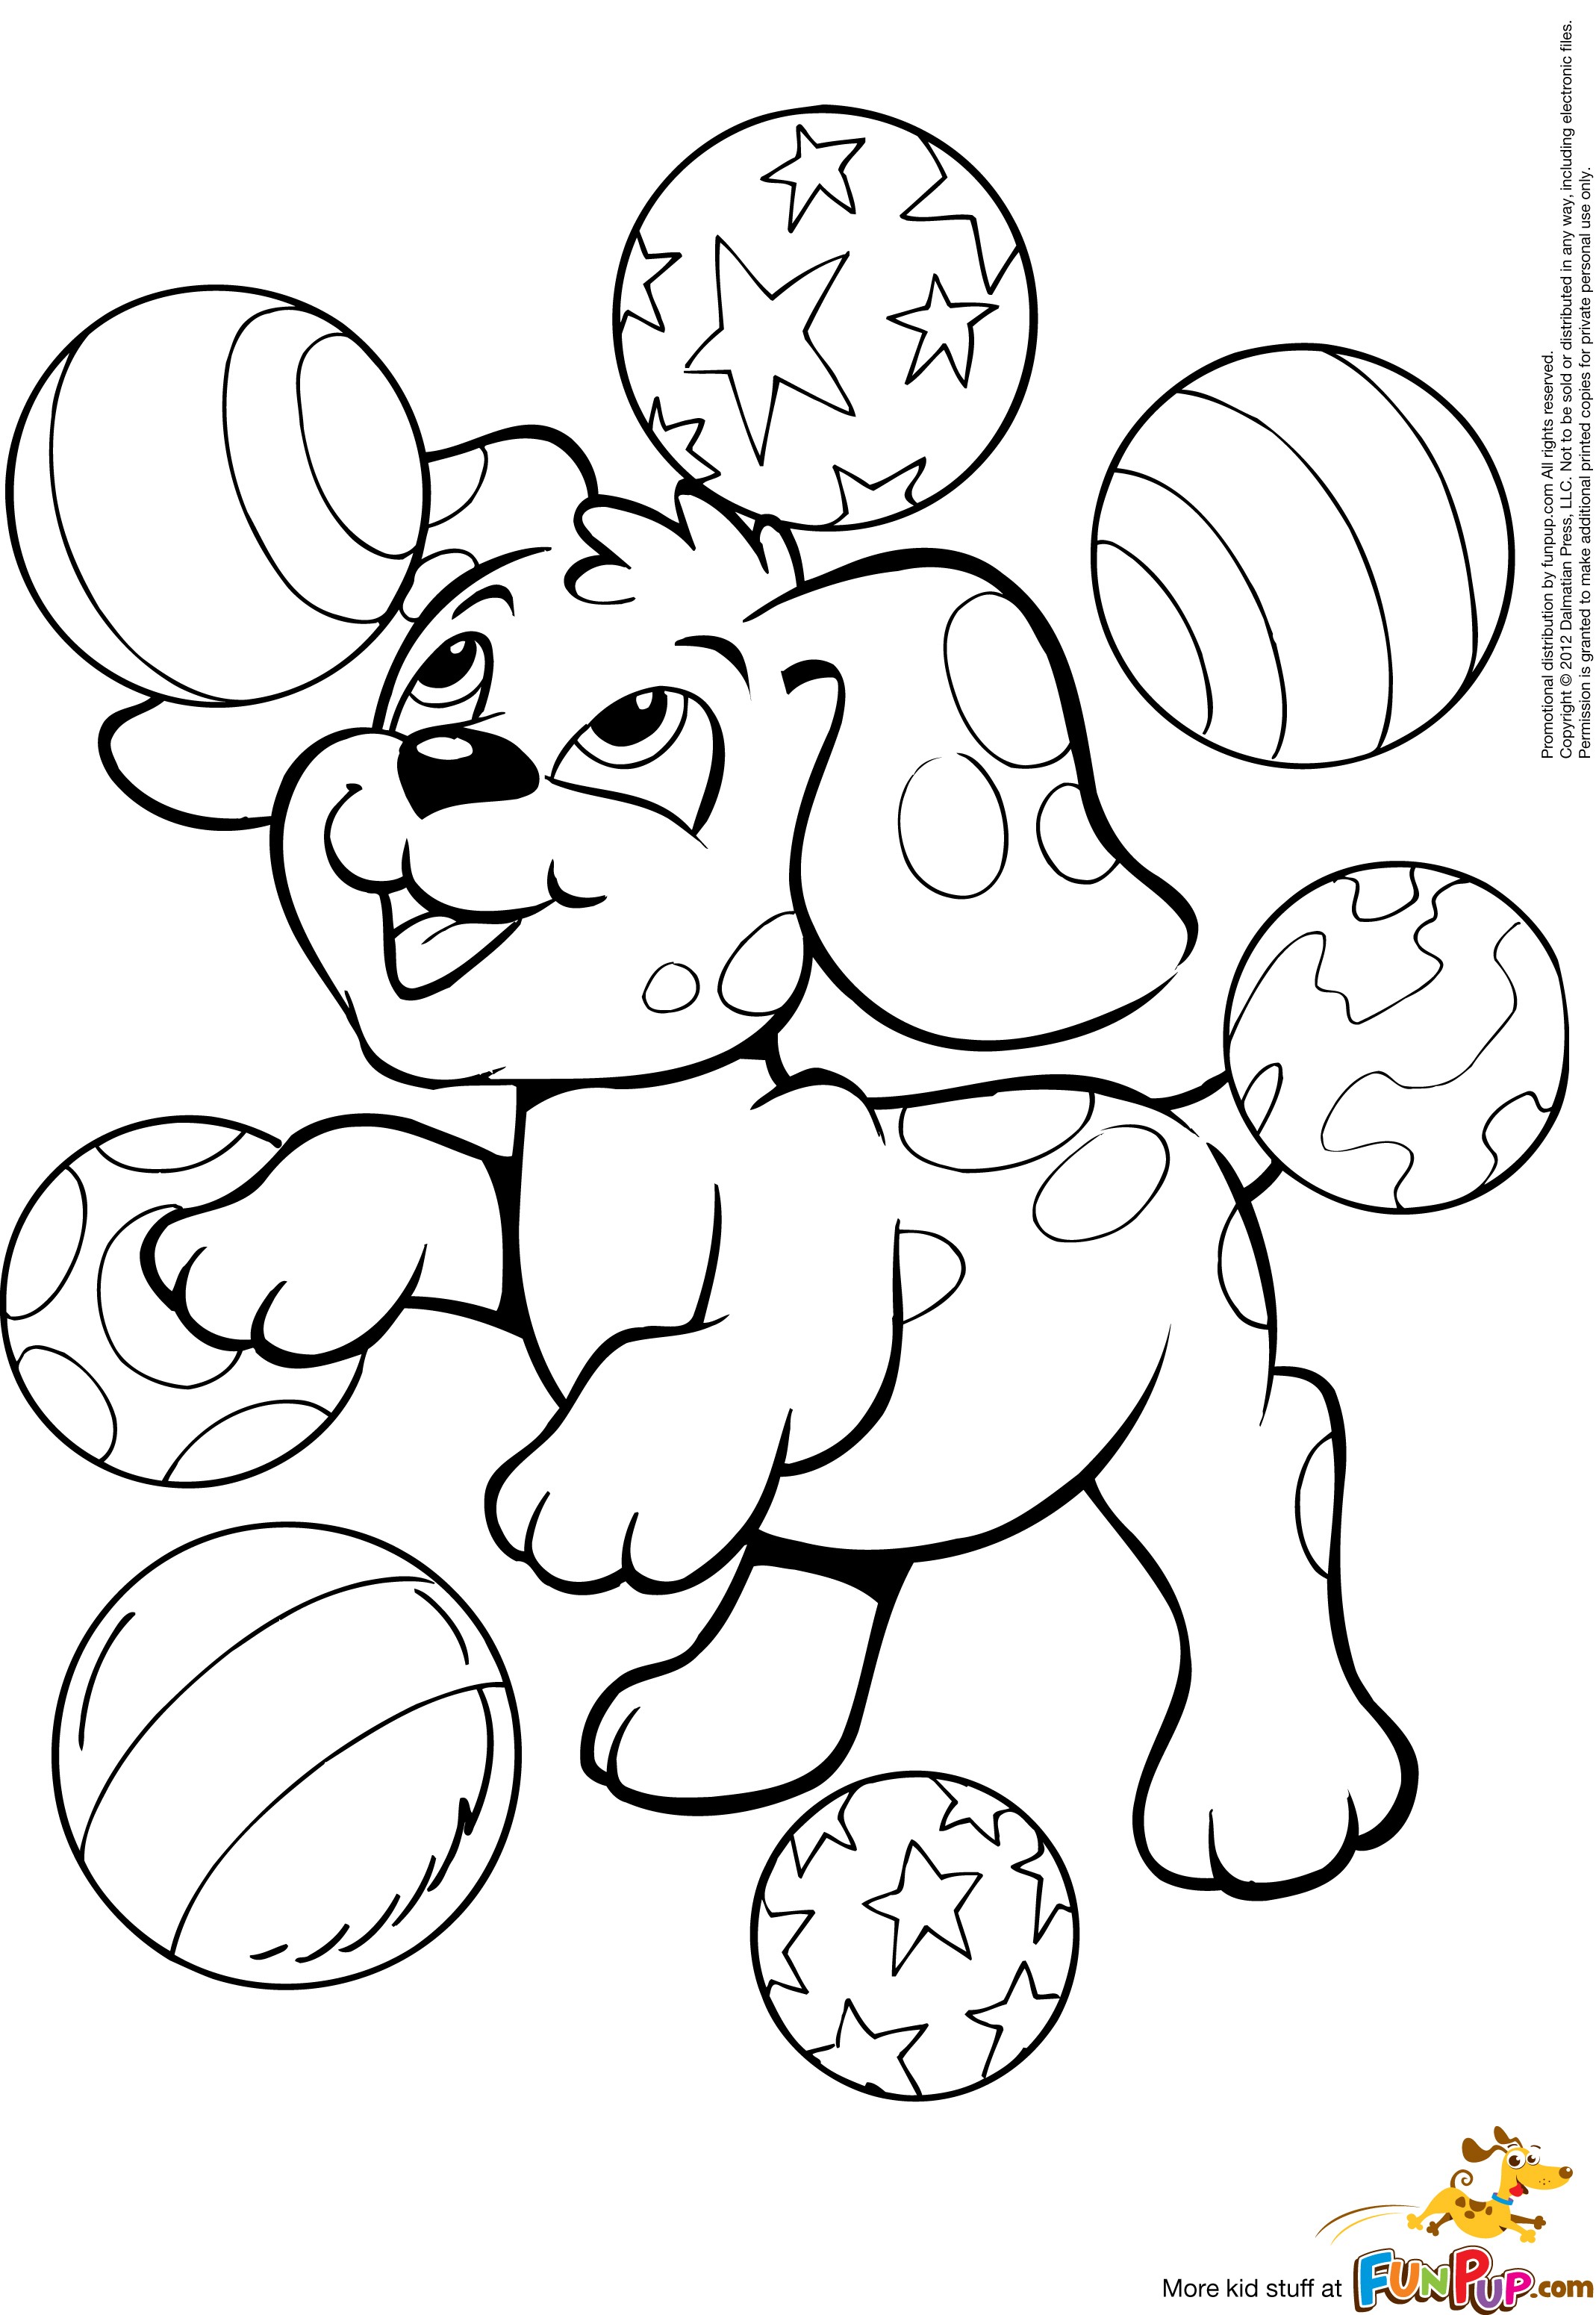 Free Printable Coloring Pages Of Puppies